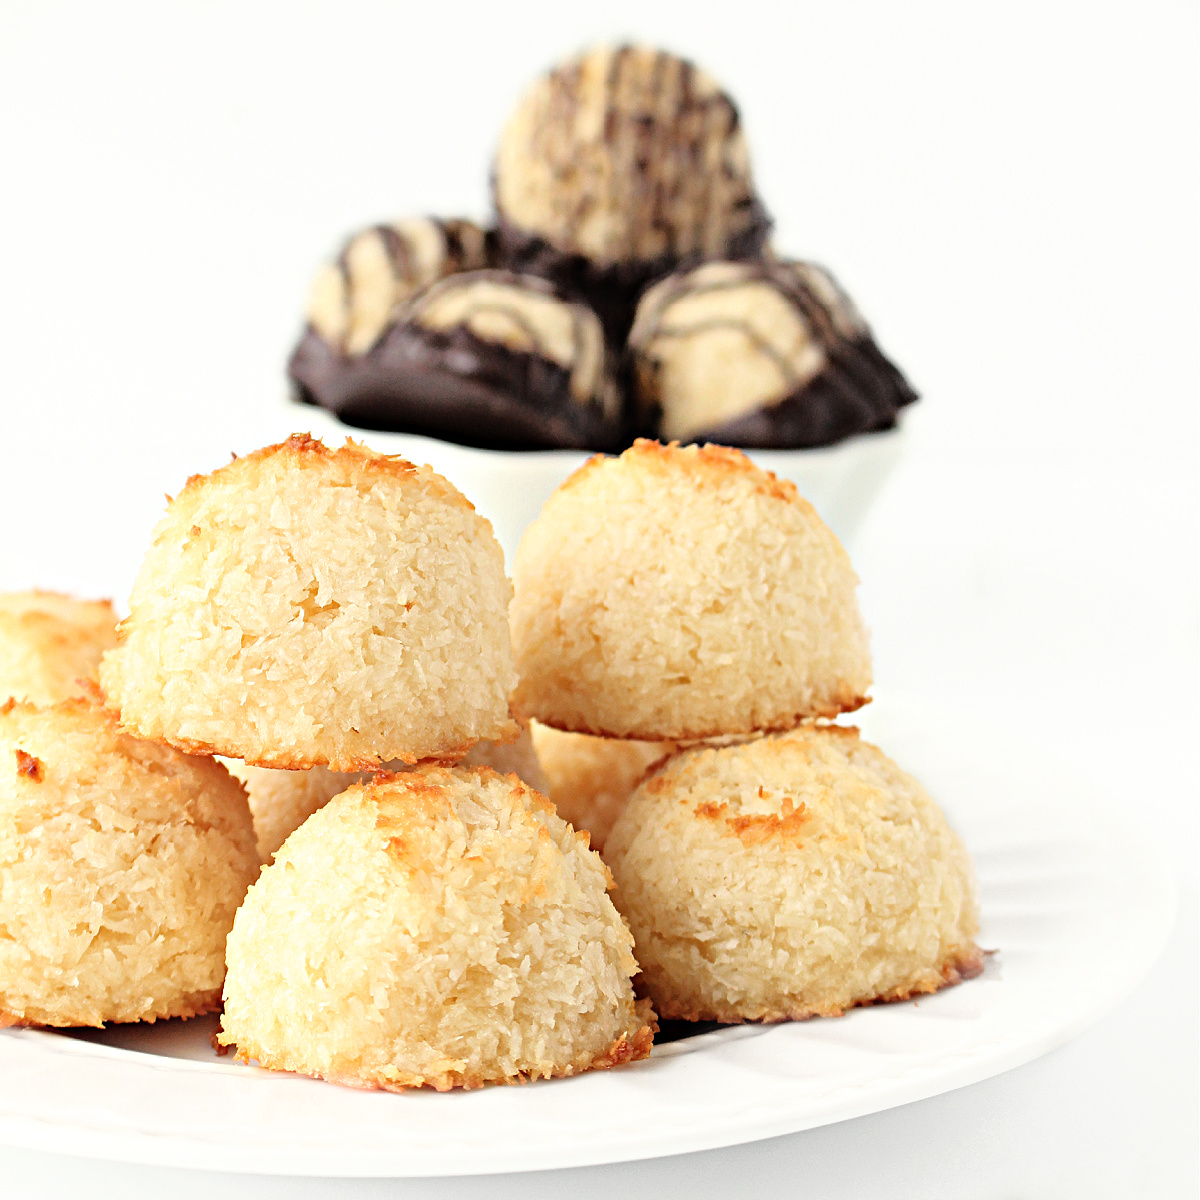 Plain coconut macaroons on a white plate.